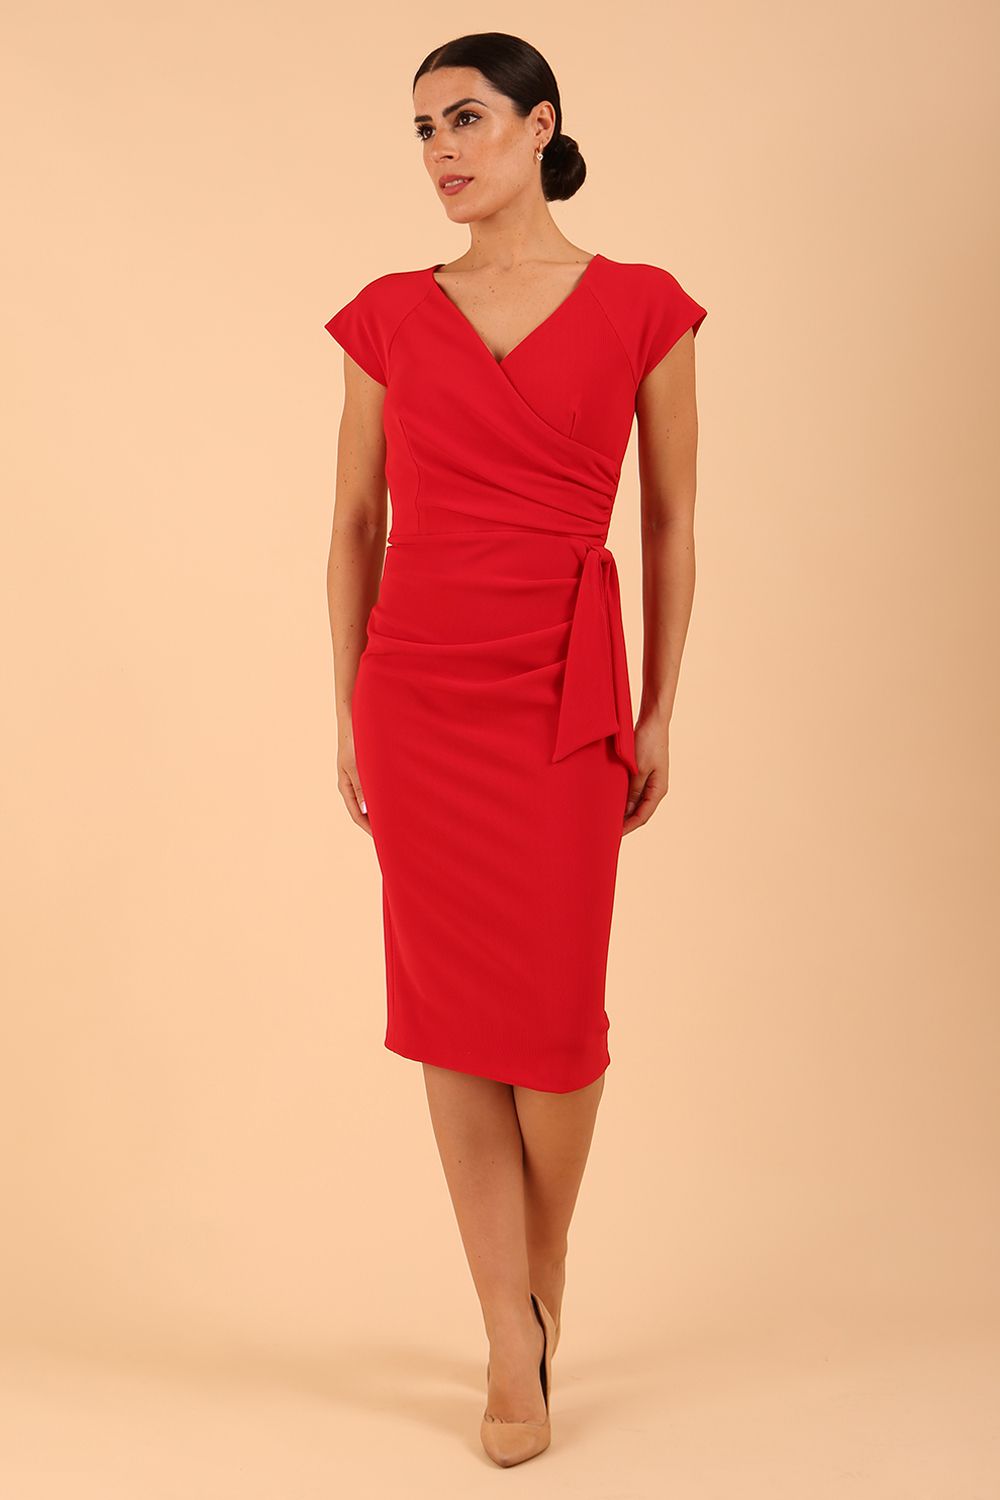 Model wearing diva catwalk Syon Short Sleeved Pencil Dress with tie detail at the waist area in True red colour front 